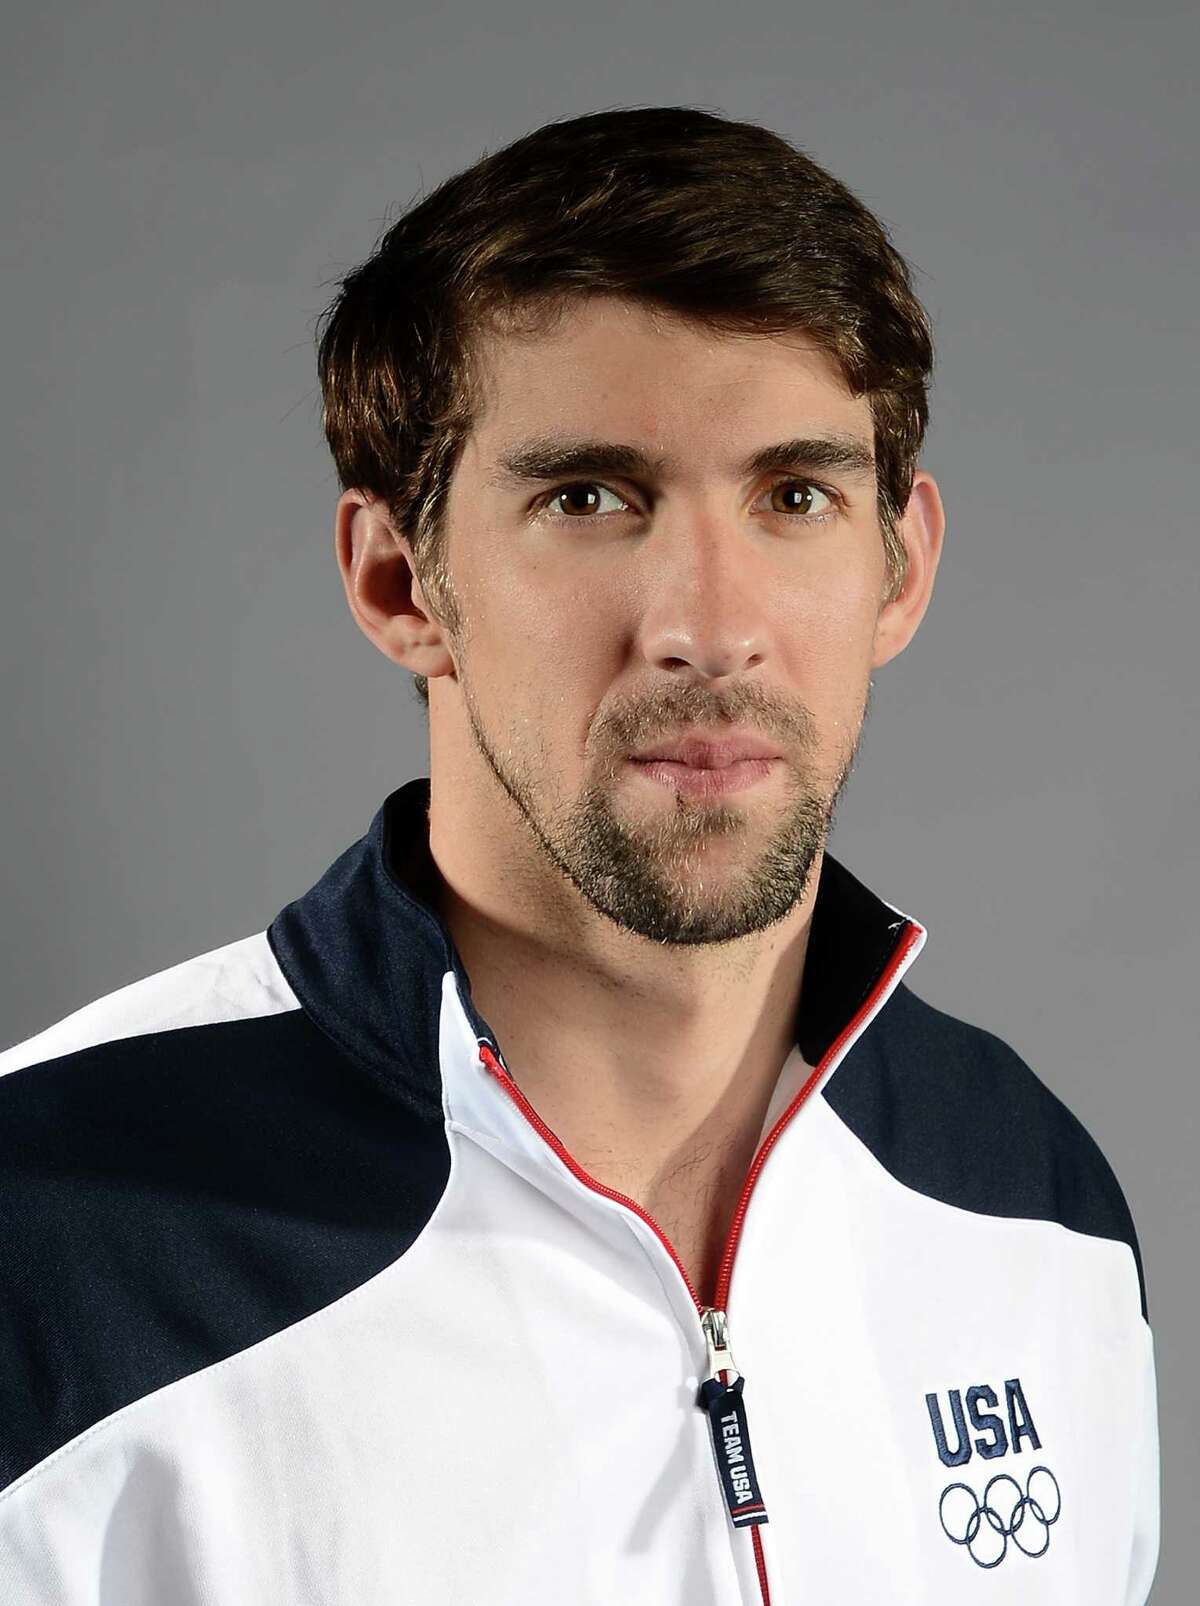 Michael Phelps of the US Olympic Swimming team poses for pictures during the 2012 Team USA Media Summit on May 13, 2012 in Dallas,Texas.AFP PHOTO/JOE KLAMARJOE KLAMAR/AFP/GettyImages